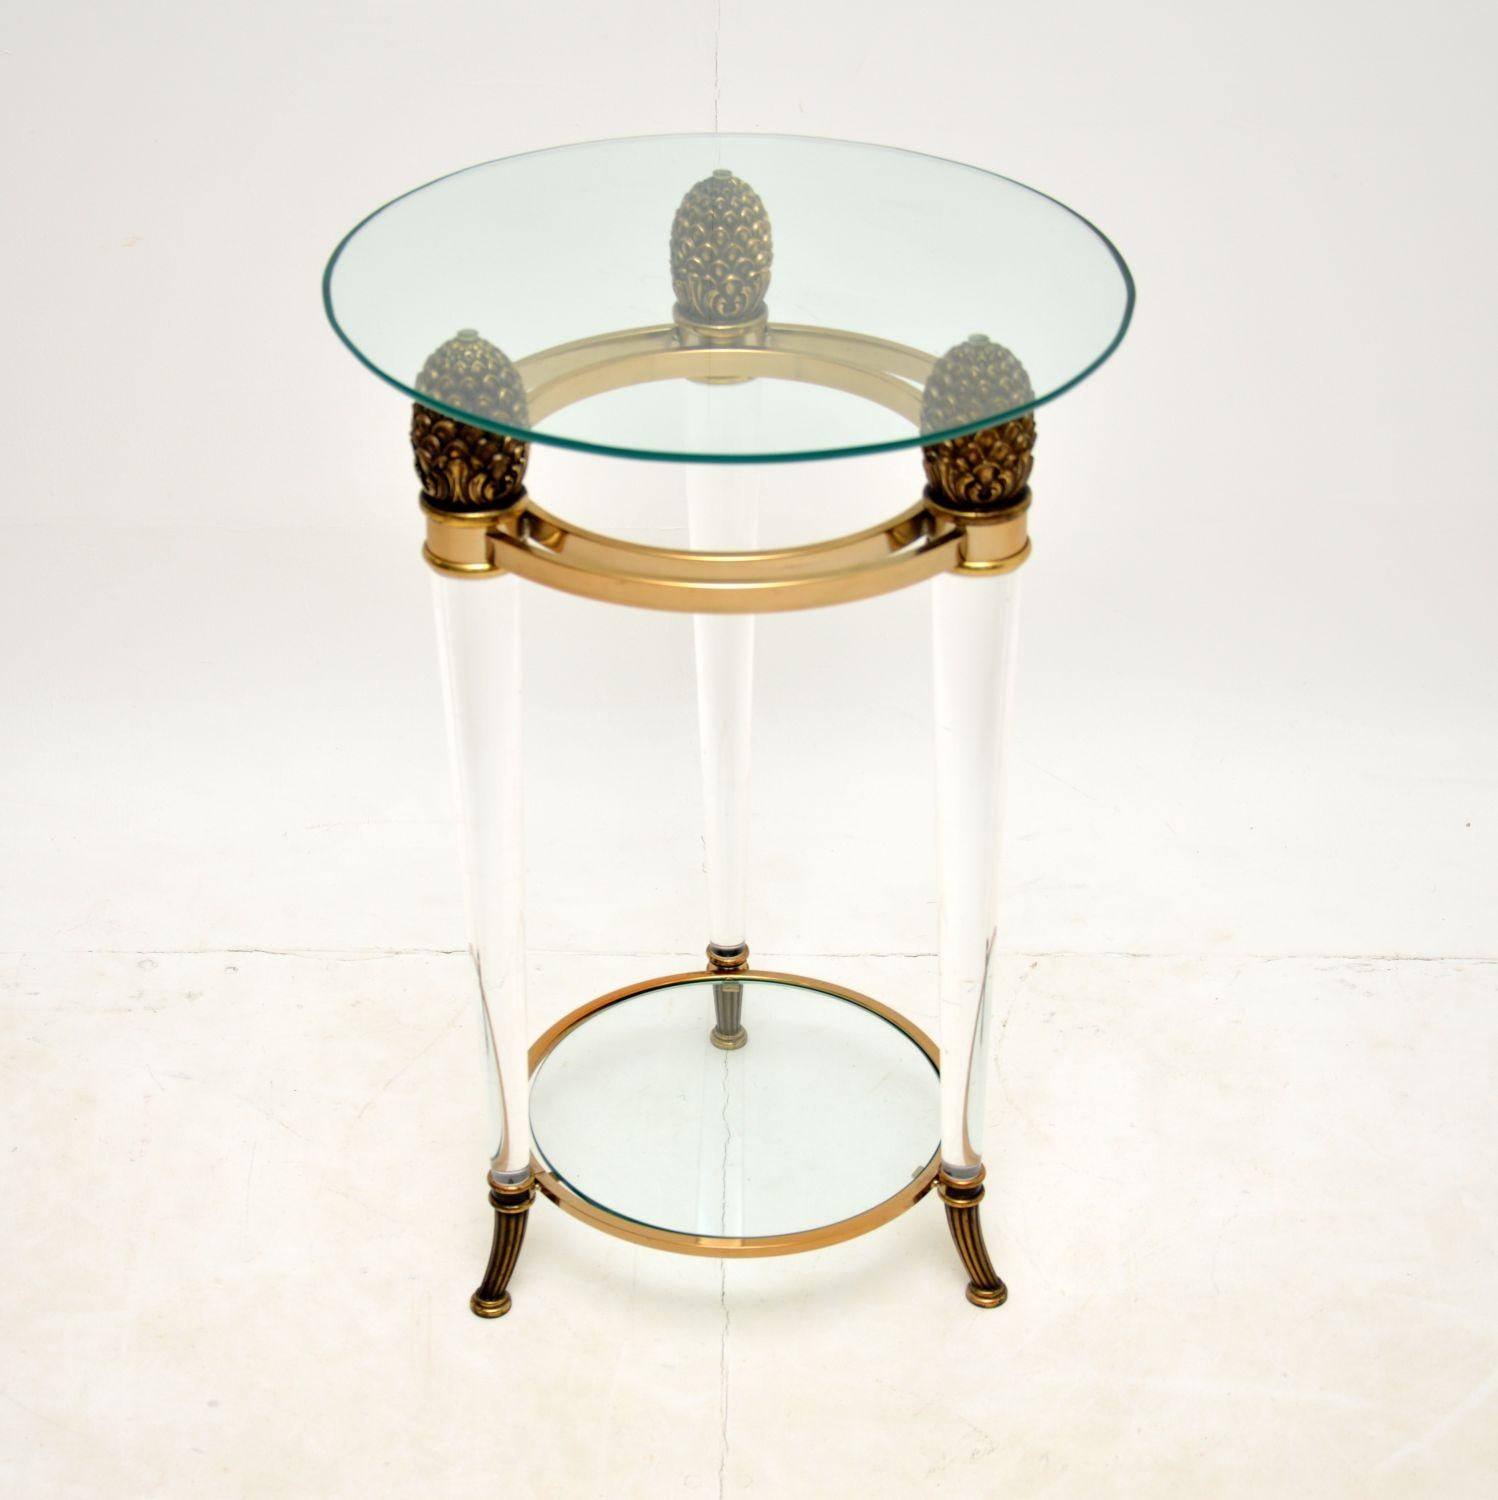 A stylish and useful vintage side table, this was made in Italy and dates from the 1970’s.

The frame is made from thick clear acrylic, with brass feet and pine cone shaped supports. There are brass plated rings at the bottom and top, and this has